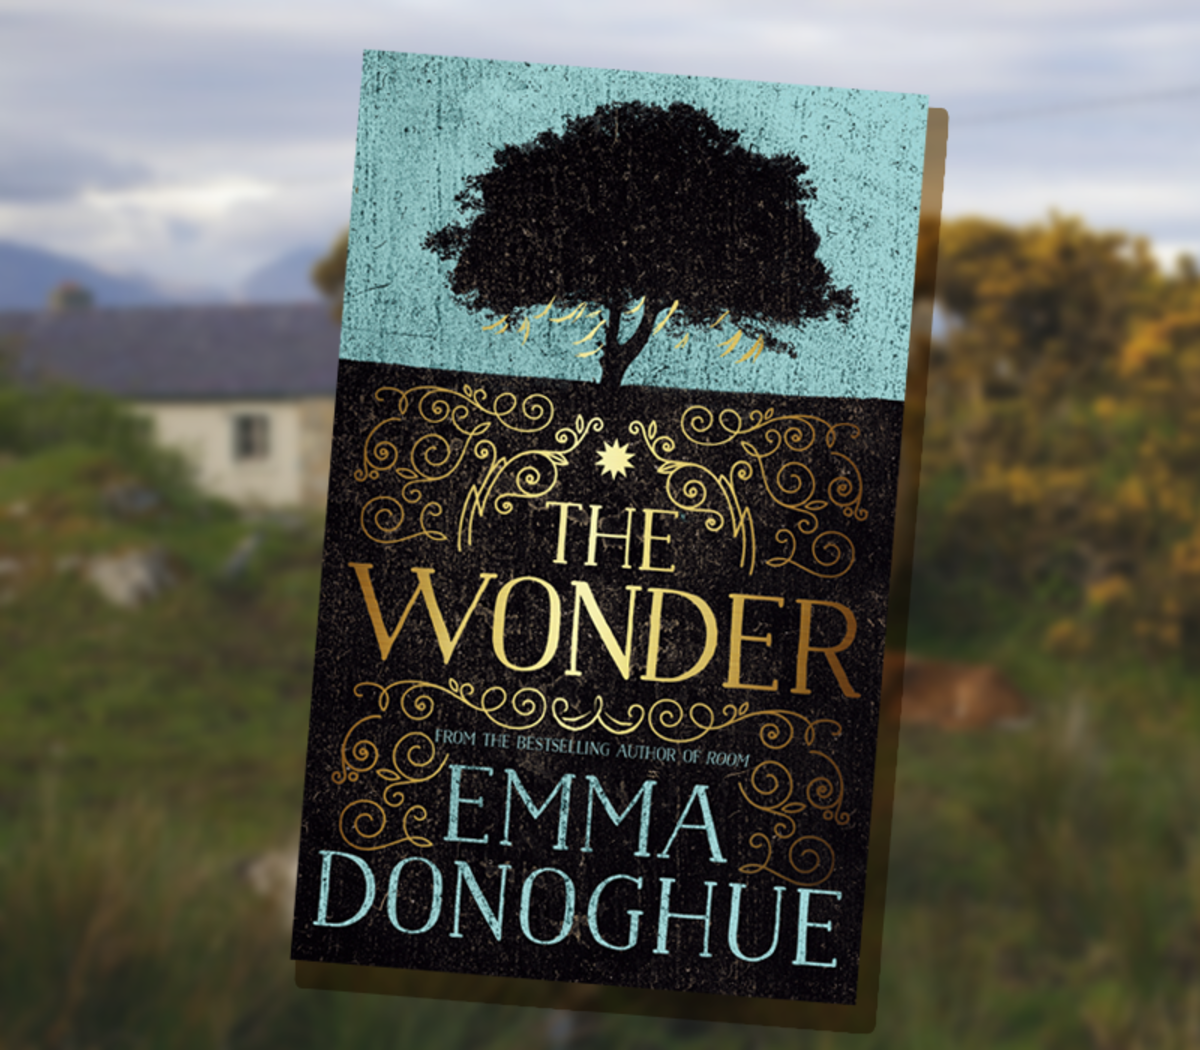 “The Wonder” by Emma Donoghue: Book Review